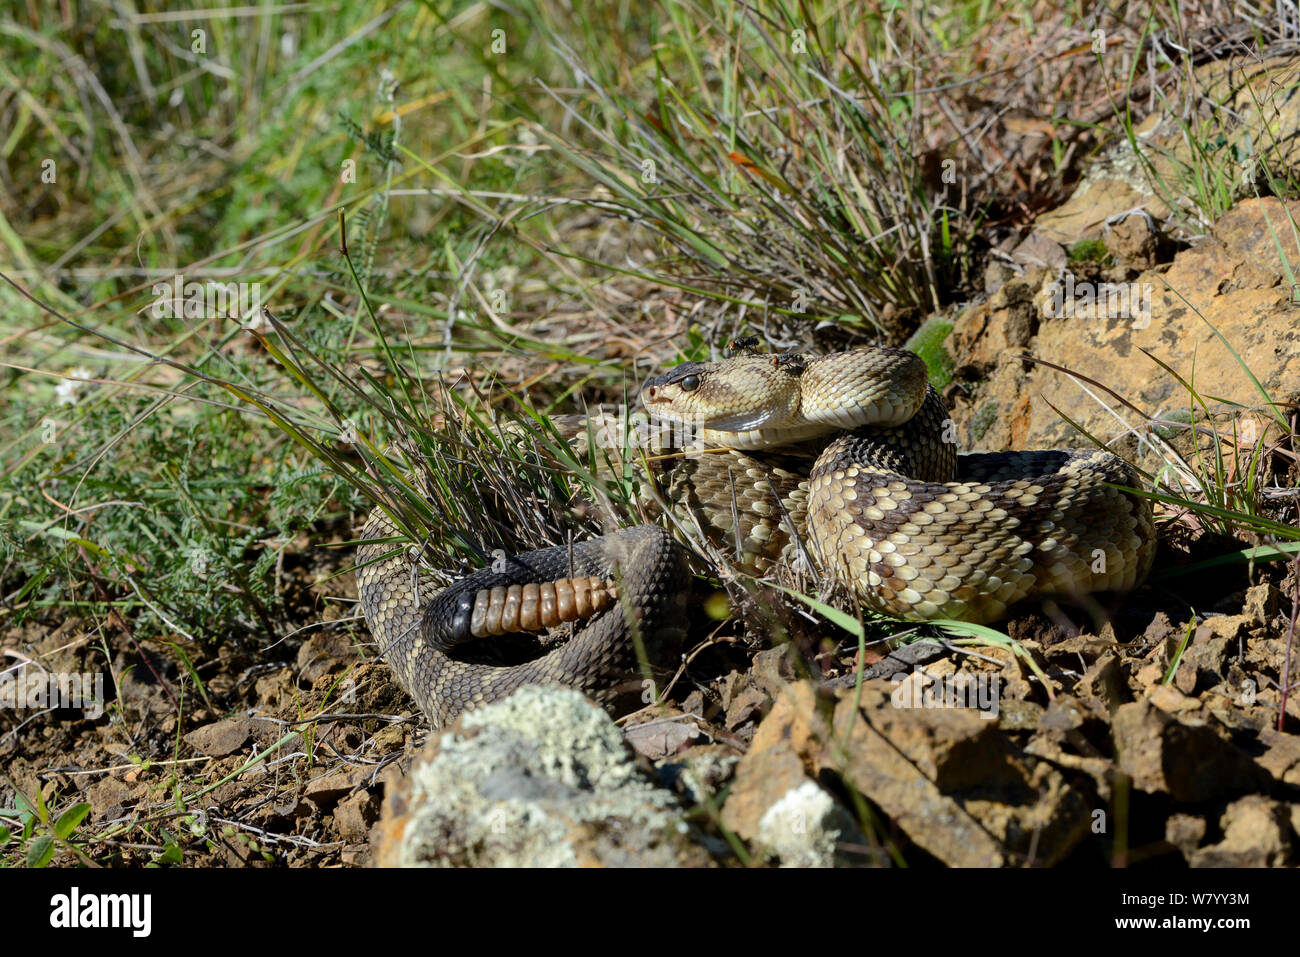 Black-tailed rattlesnake (Crotalus molossus) with flies on head, Arizona, USA, September. Controlled conditions. Stock Photo